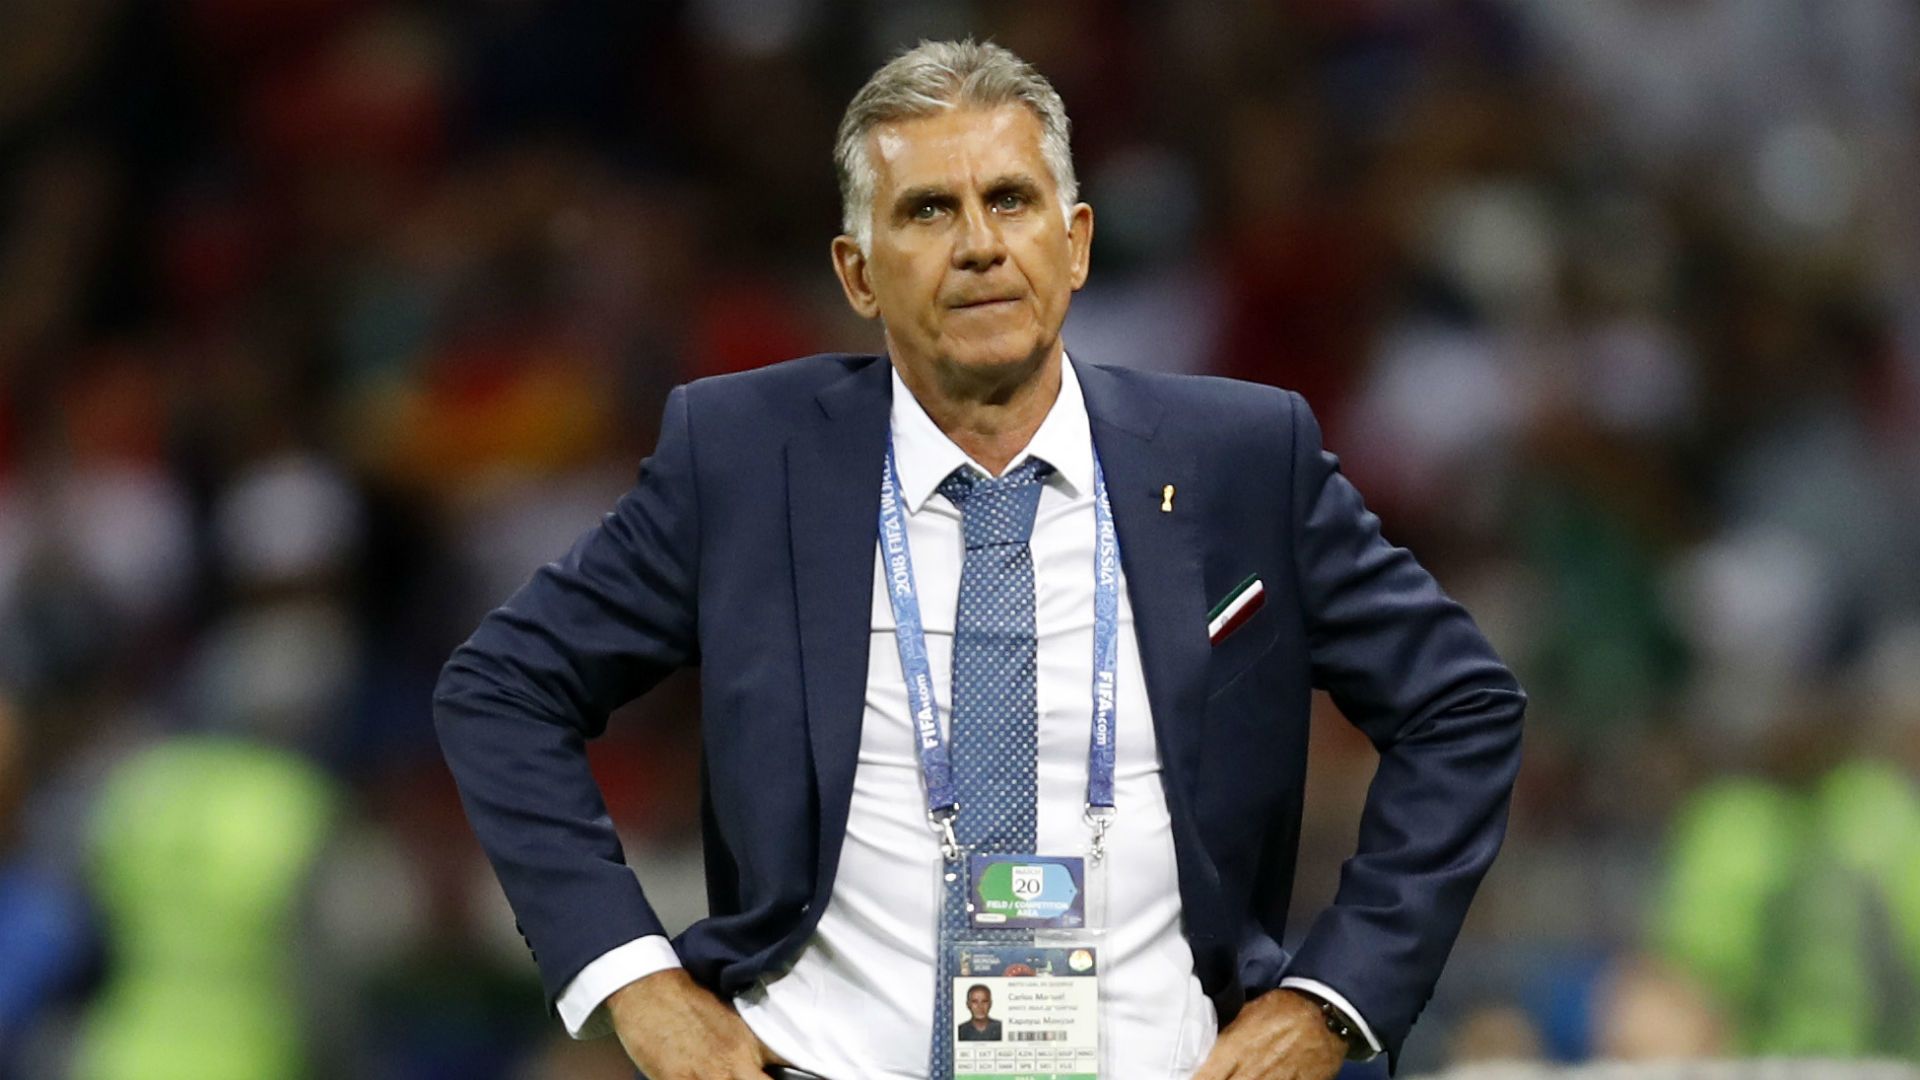 Head coach of the Iranian national team Queiroz is outraged by the question about the situation in the country